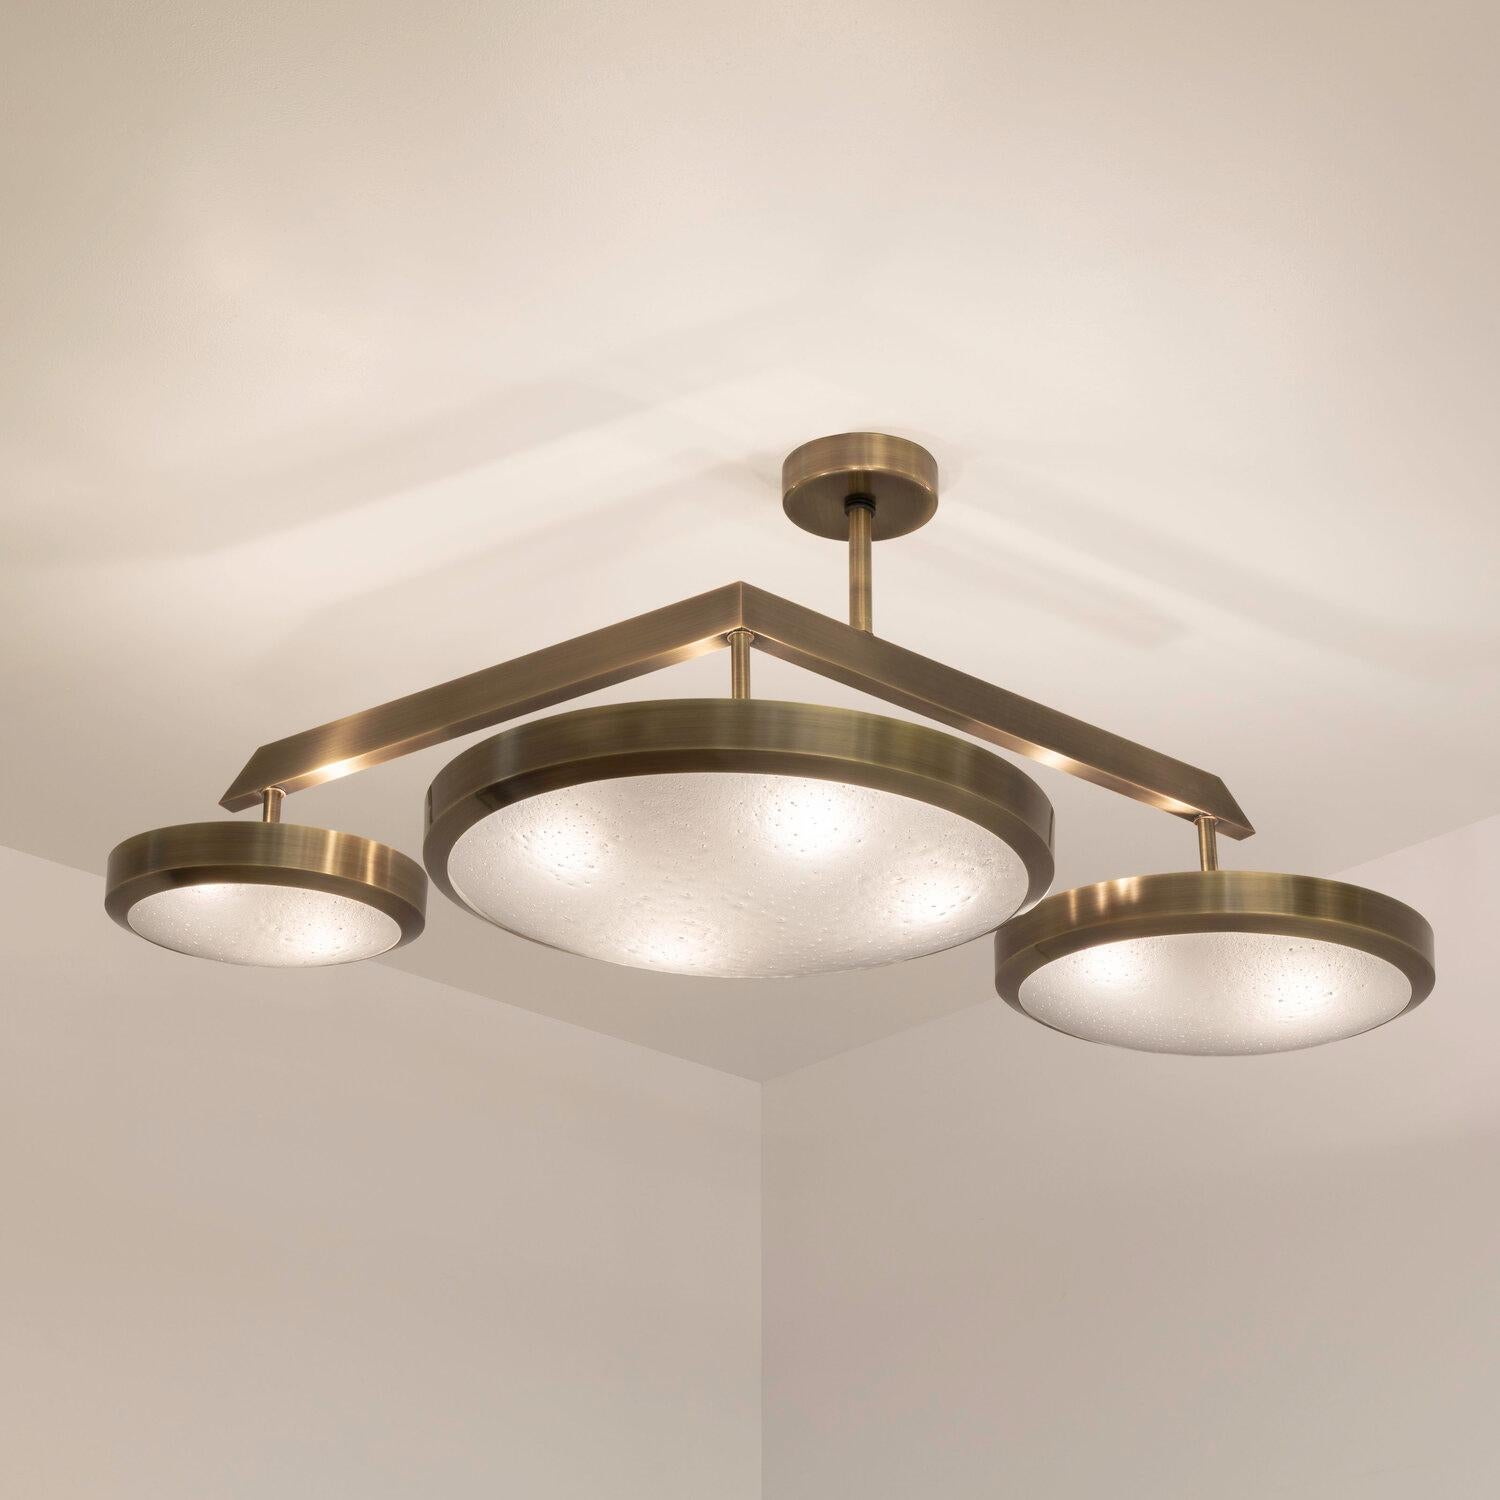 Zeta Ceiling Light by Gaspare Asaro-Satin Brass Finish For Sale 3